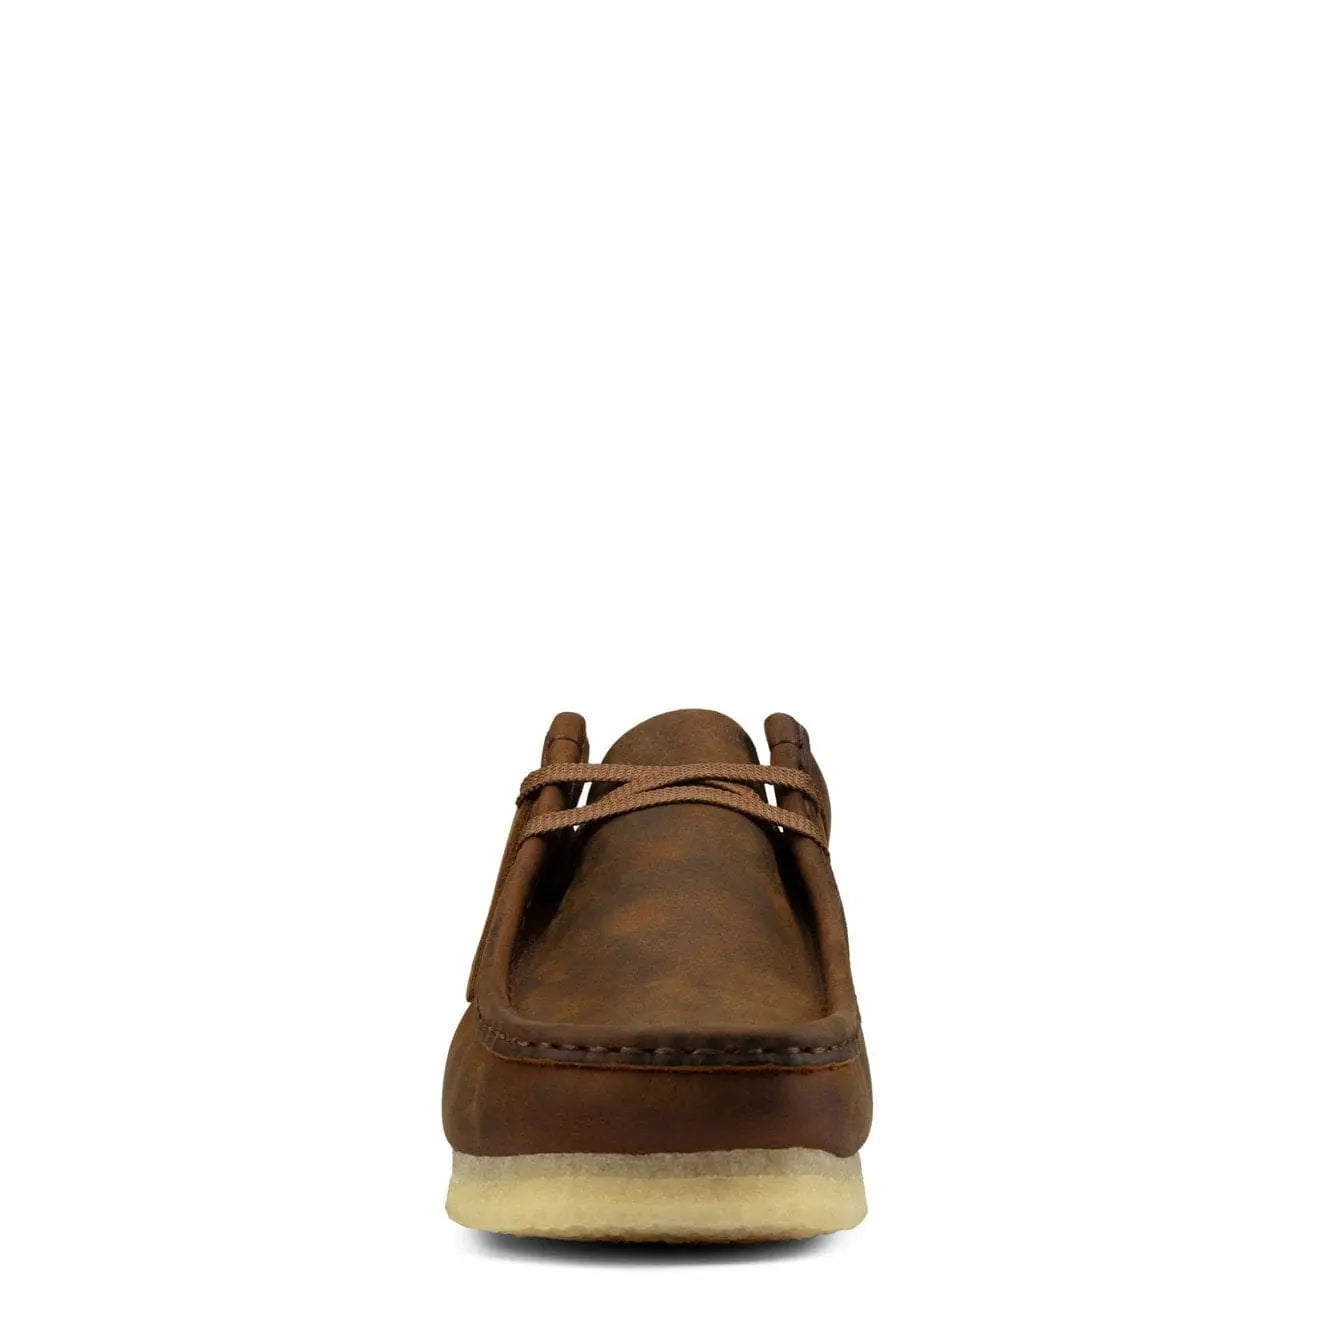 Originals Wallabee Shoes Beeswax Leather | The Sporting Lodge